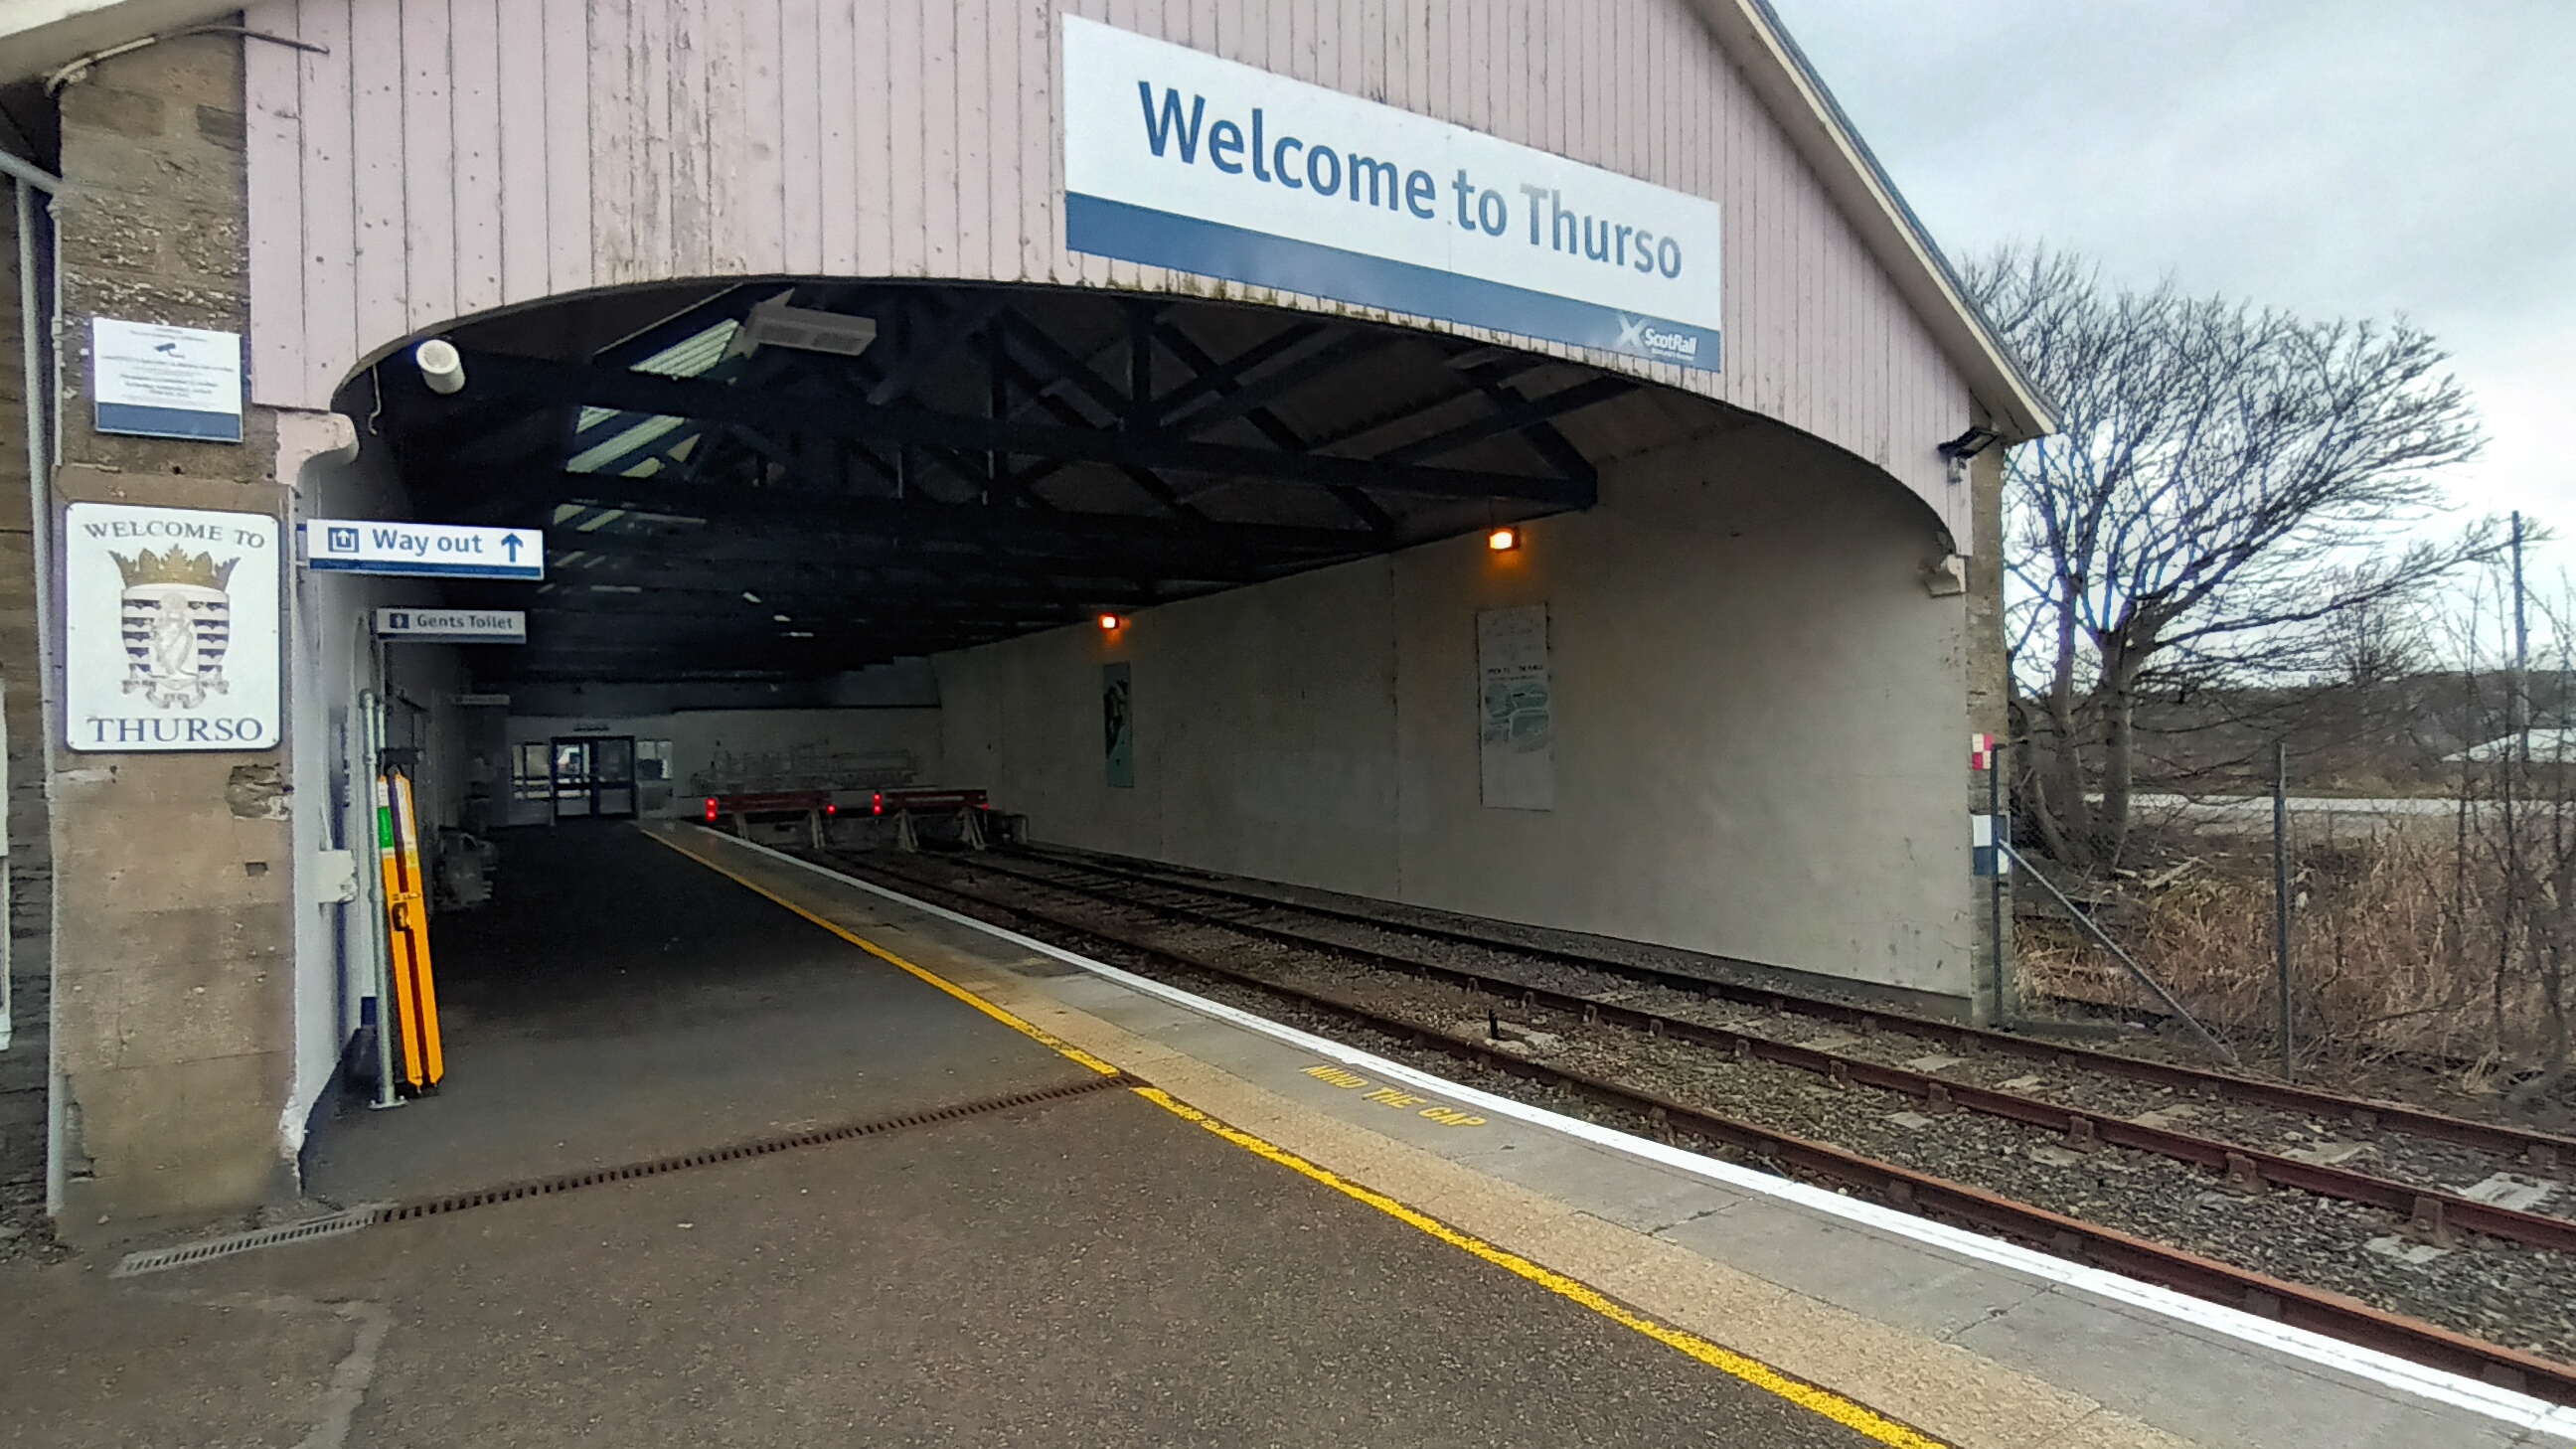 Thurso Station a possible target